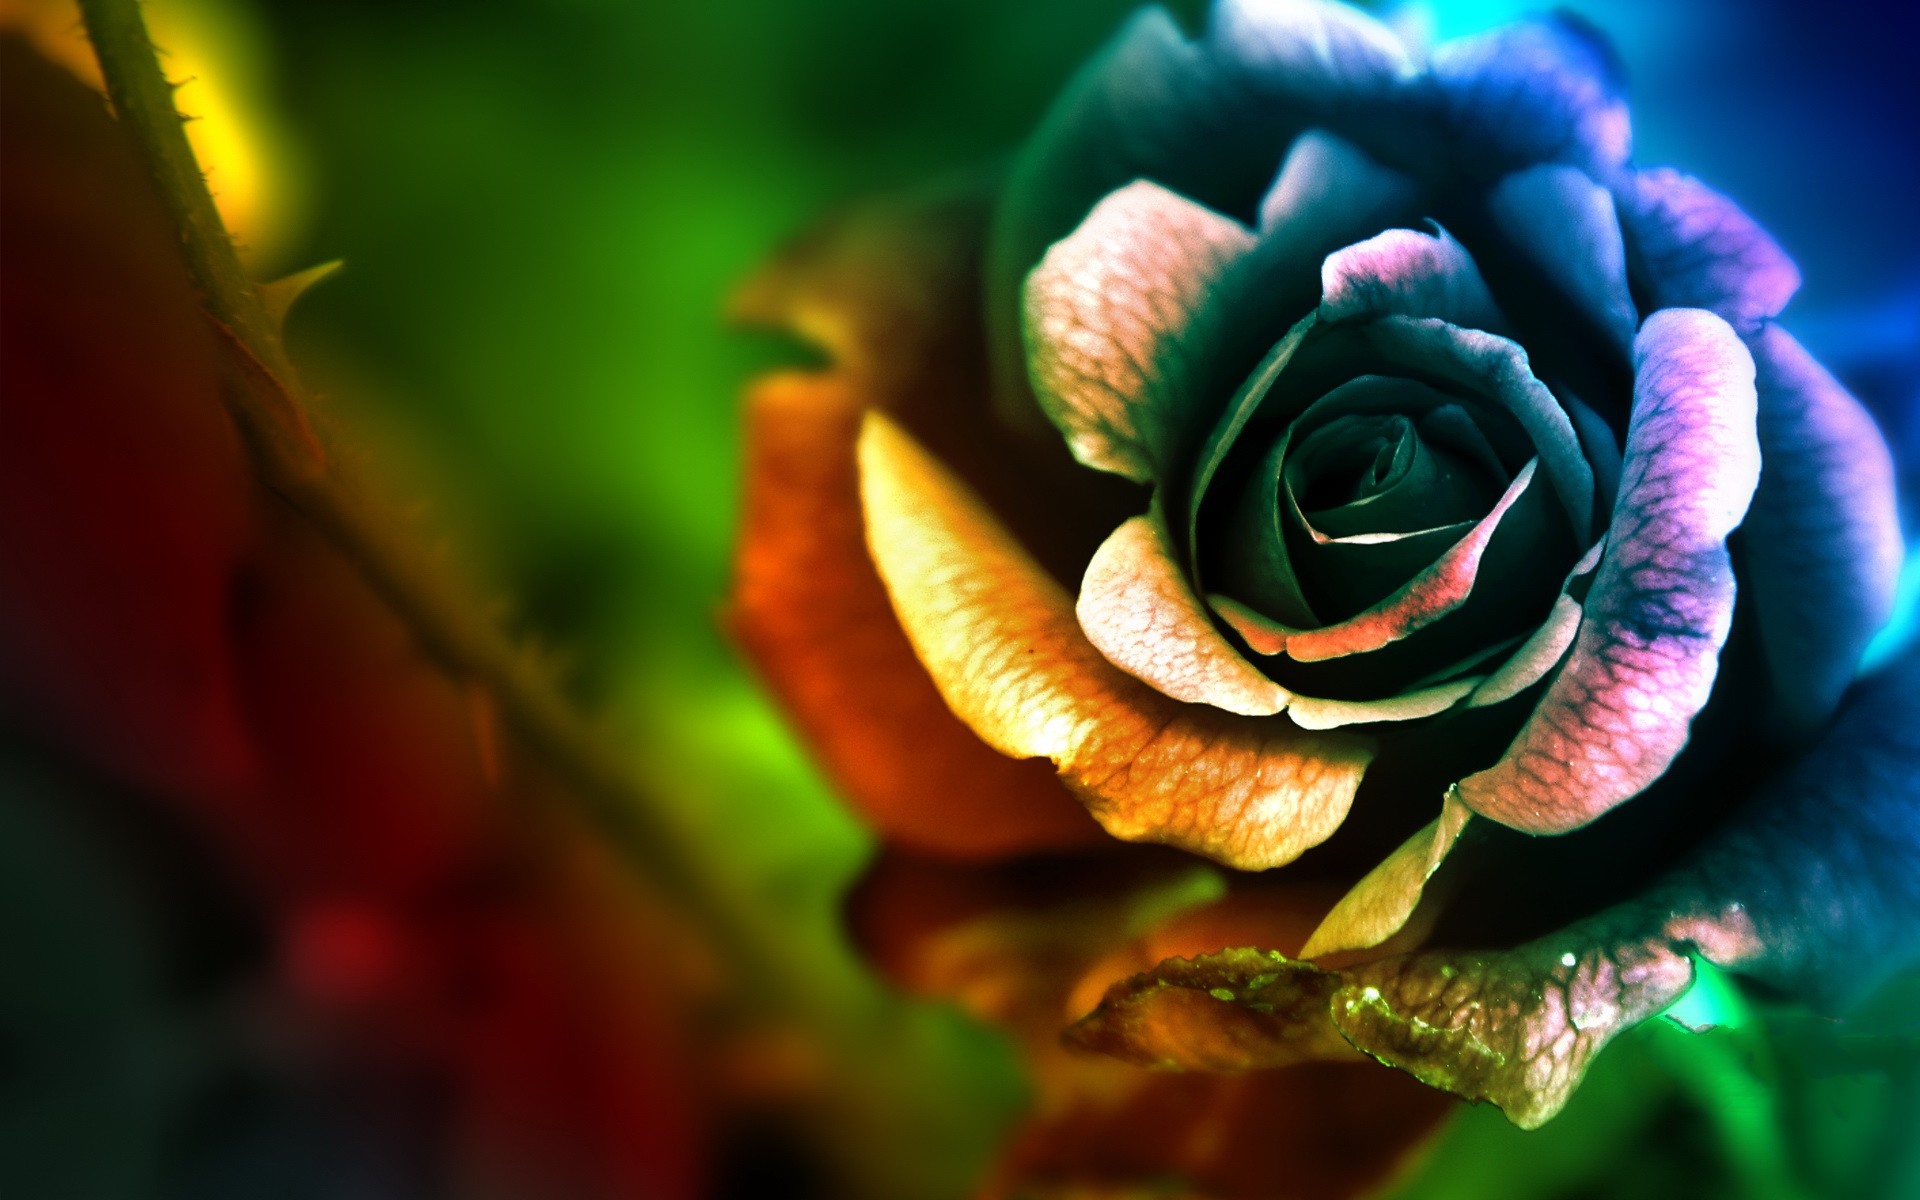 The Rose In Many Colors Artistic And Abstract Wallpaper